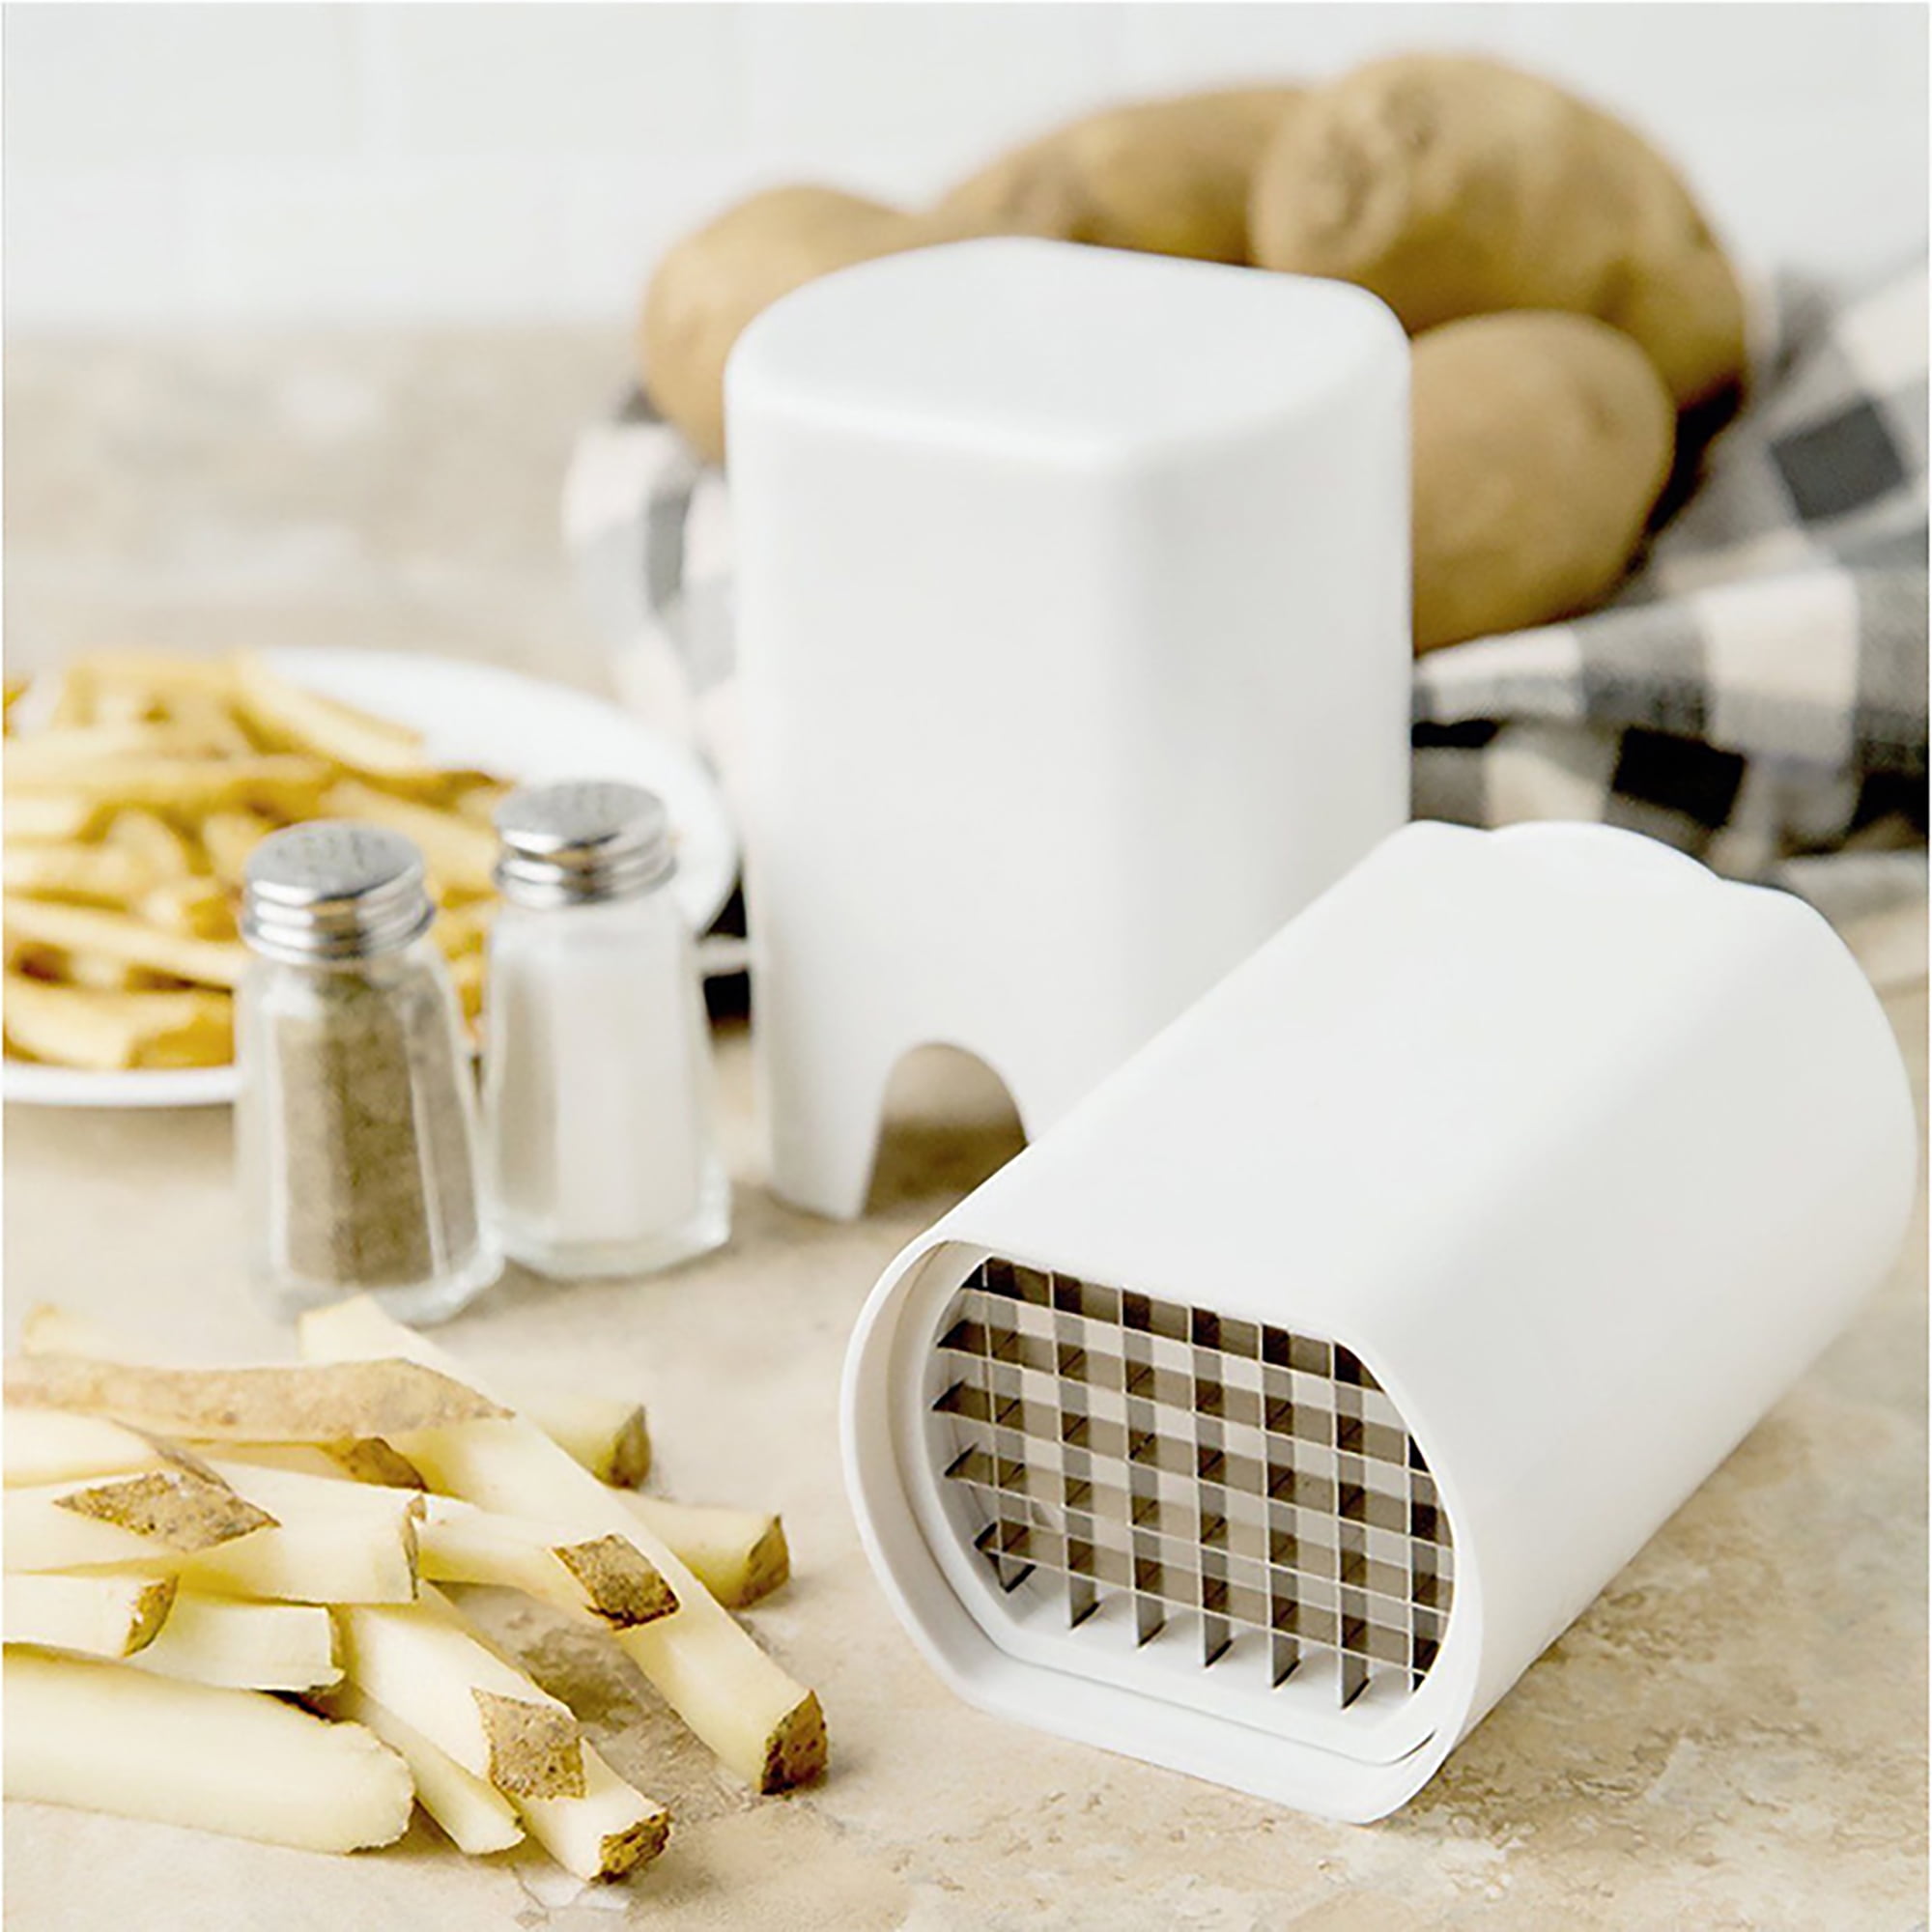 Vegetable and FRENCH FRY Cutter – Health Craft